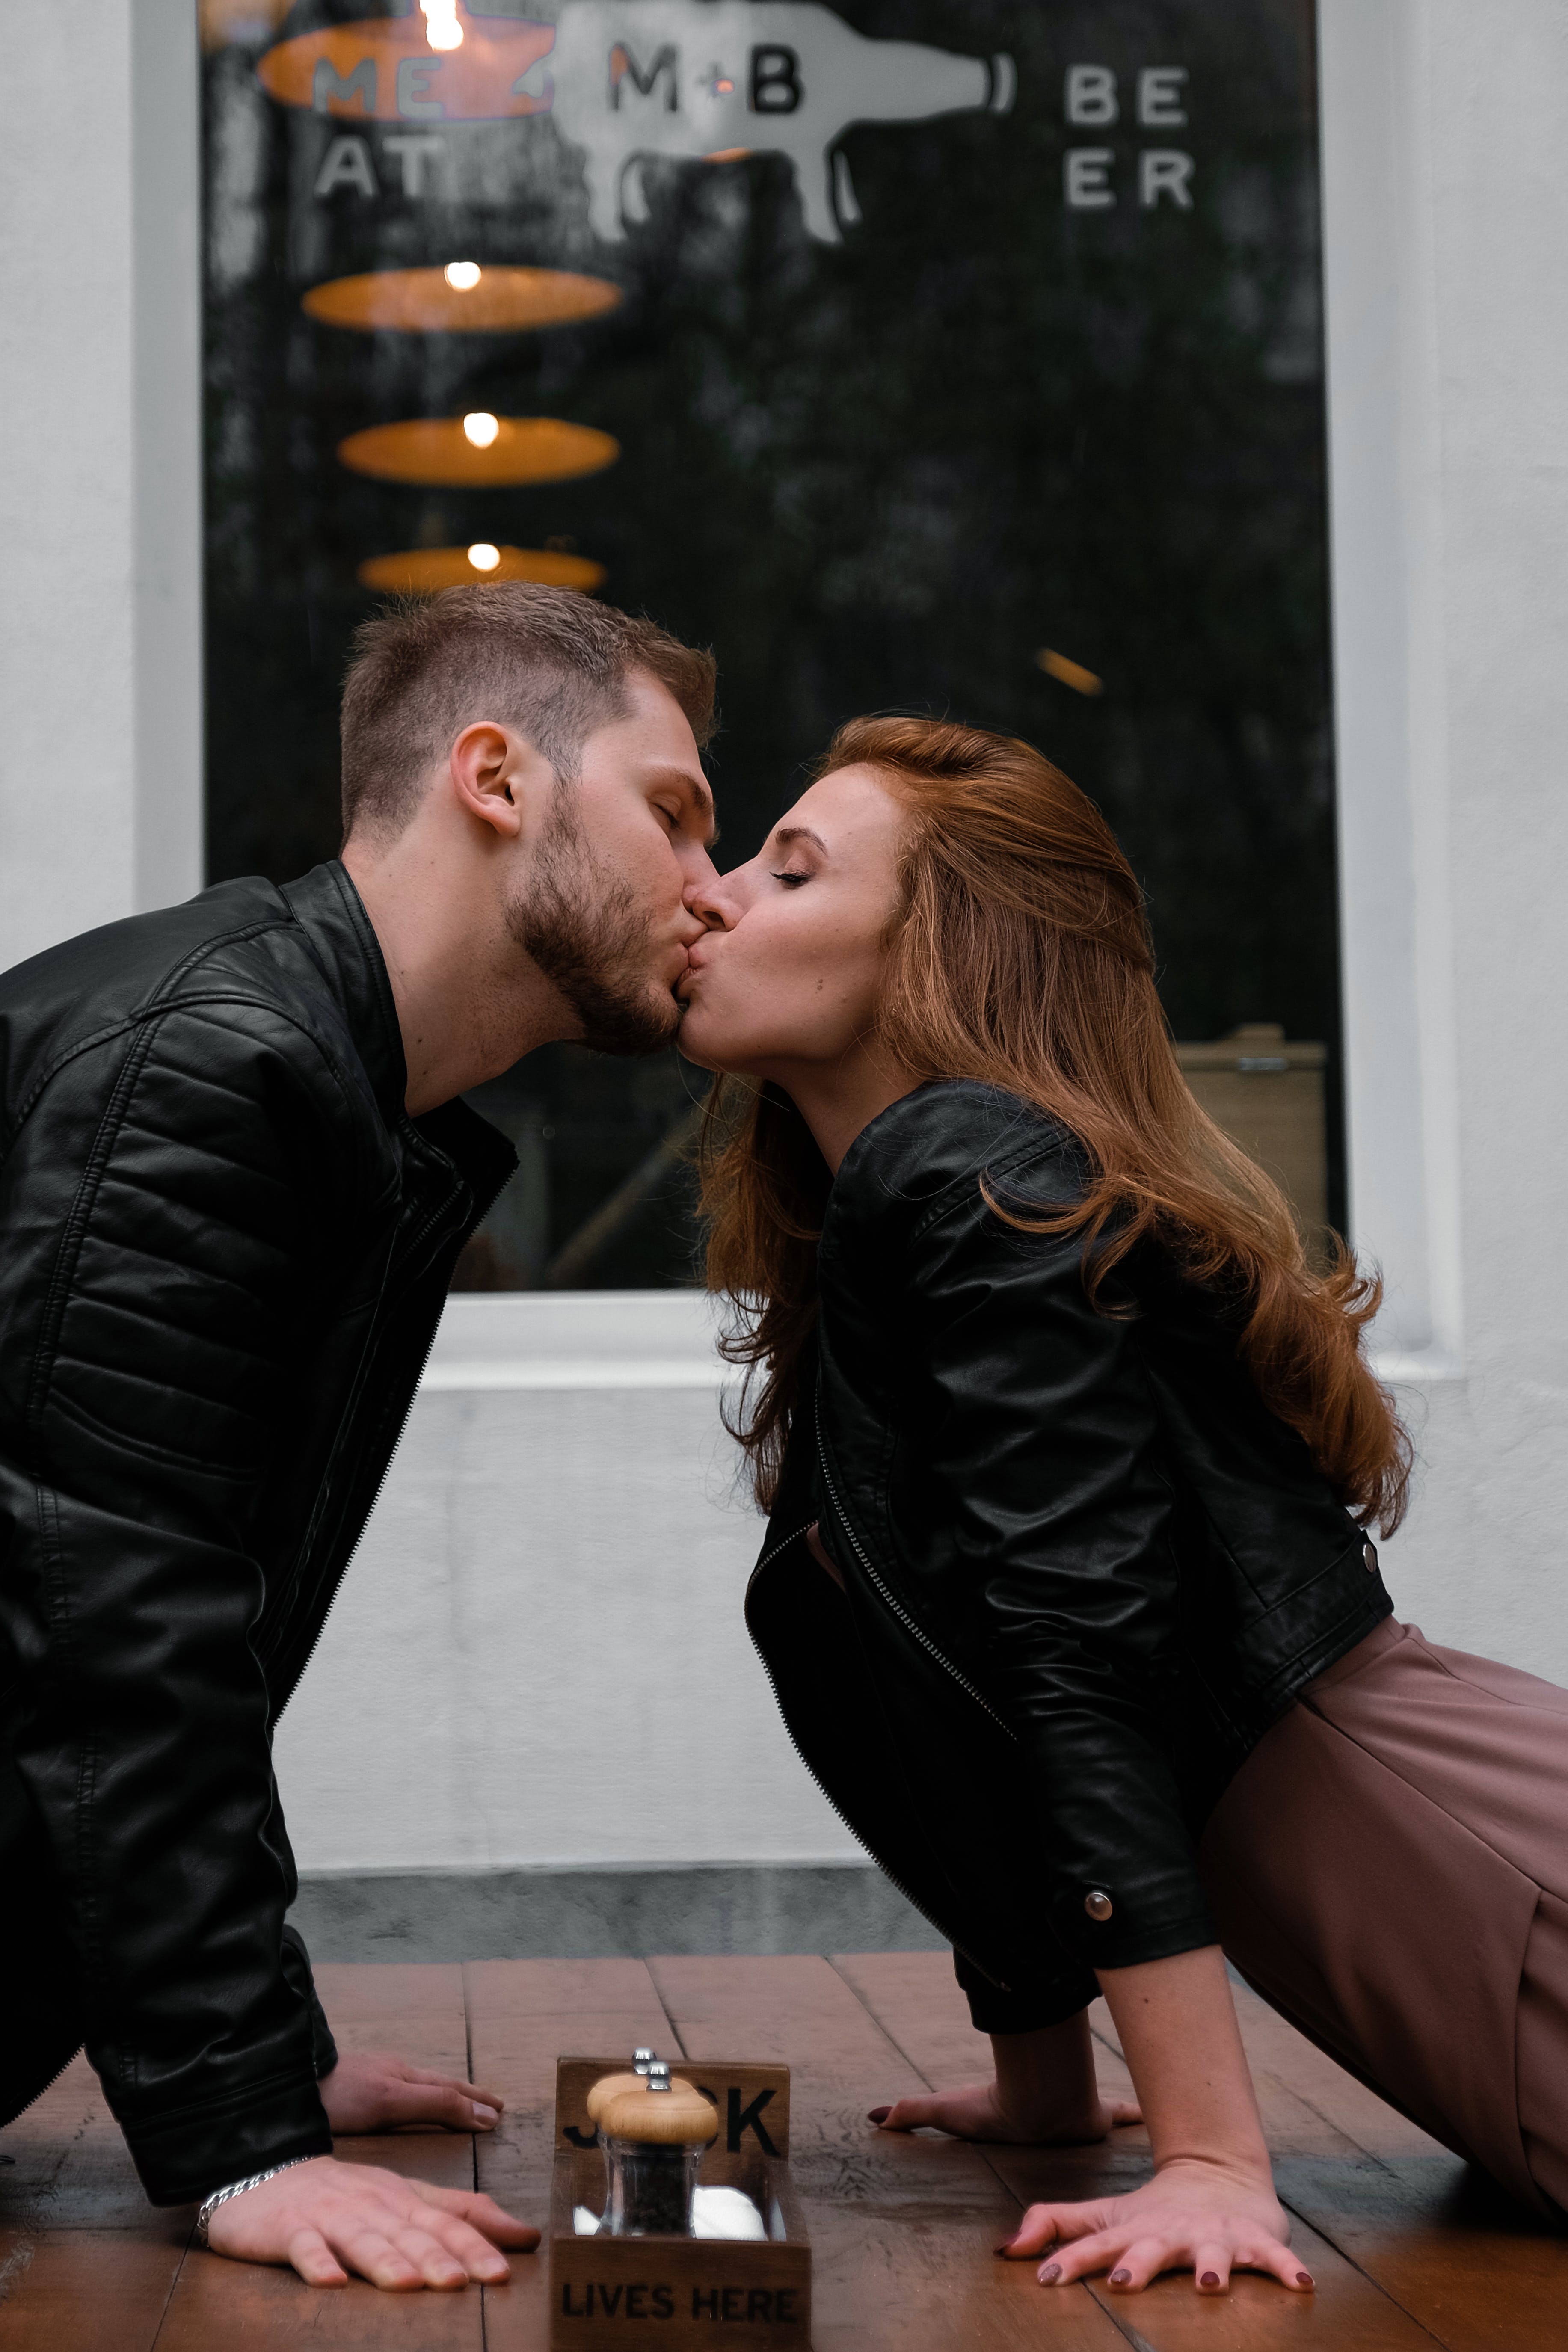 A couple kissing passionately | Source: Pexels